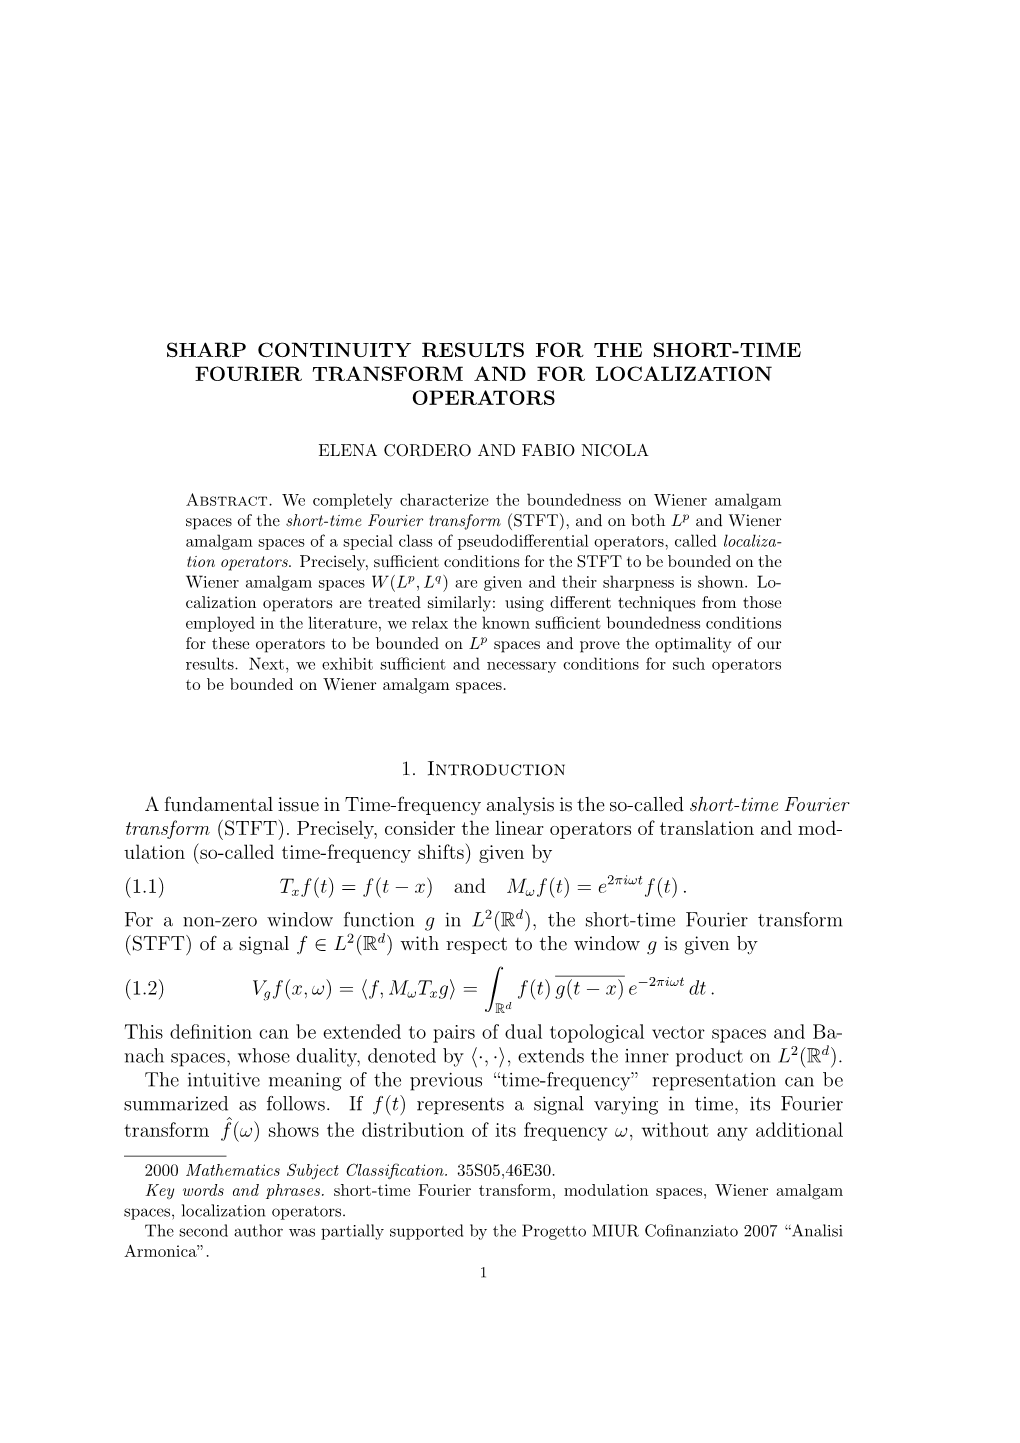 Sharp Continuity Results for the Short-Time Fourier Transform and for Localization Operators